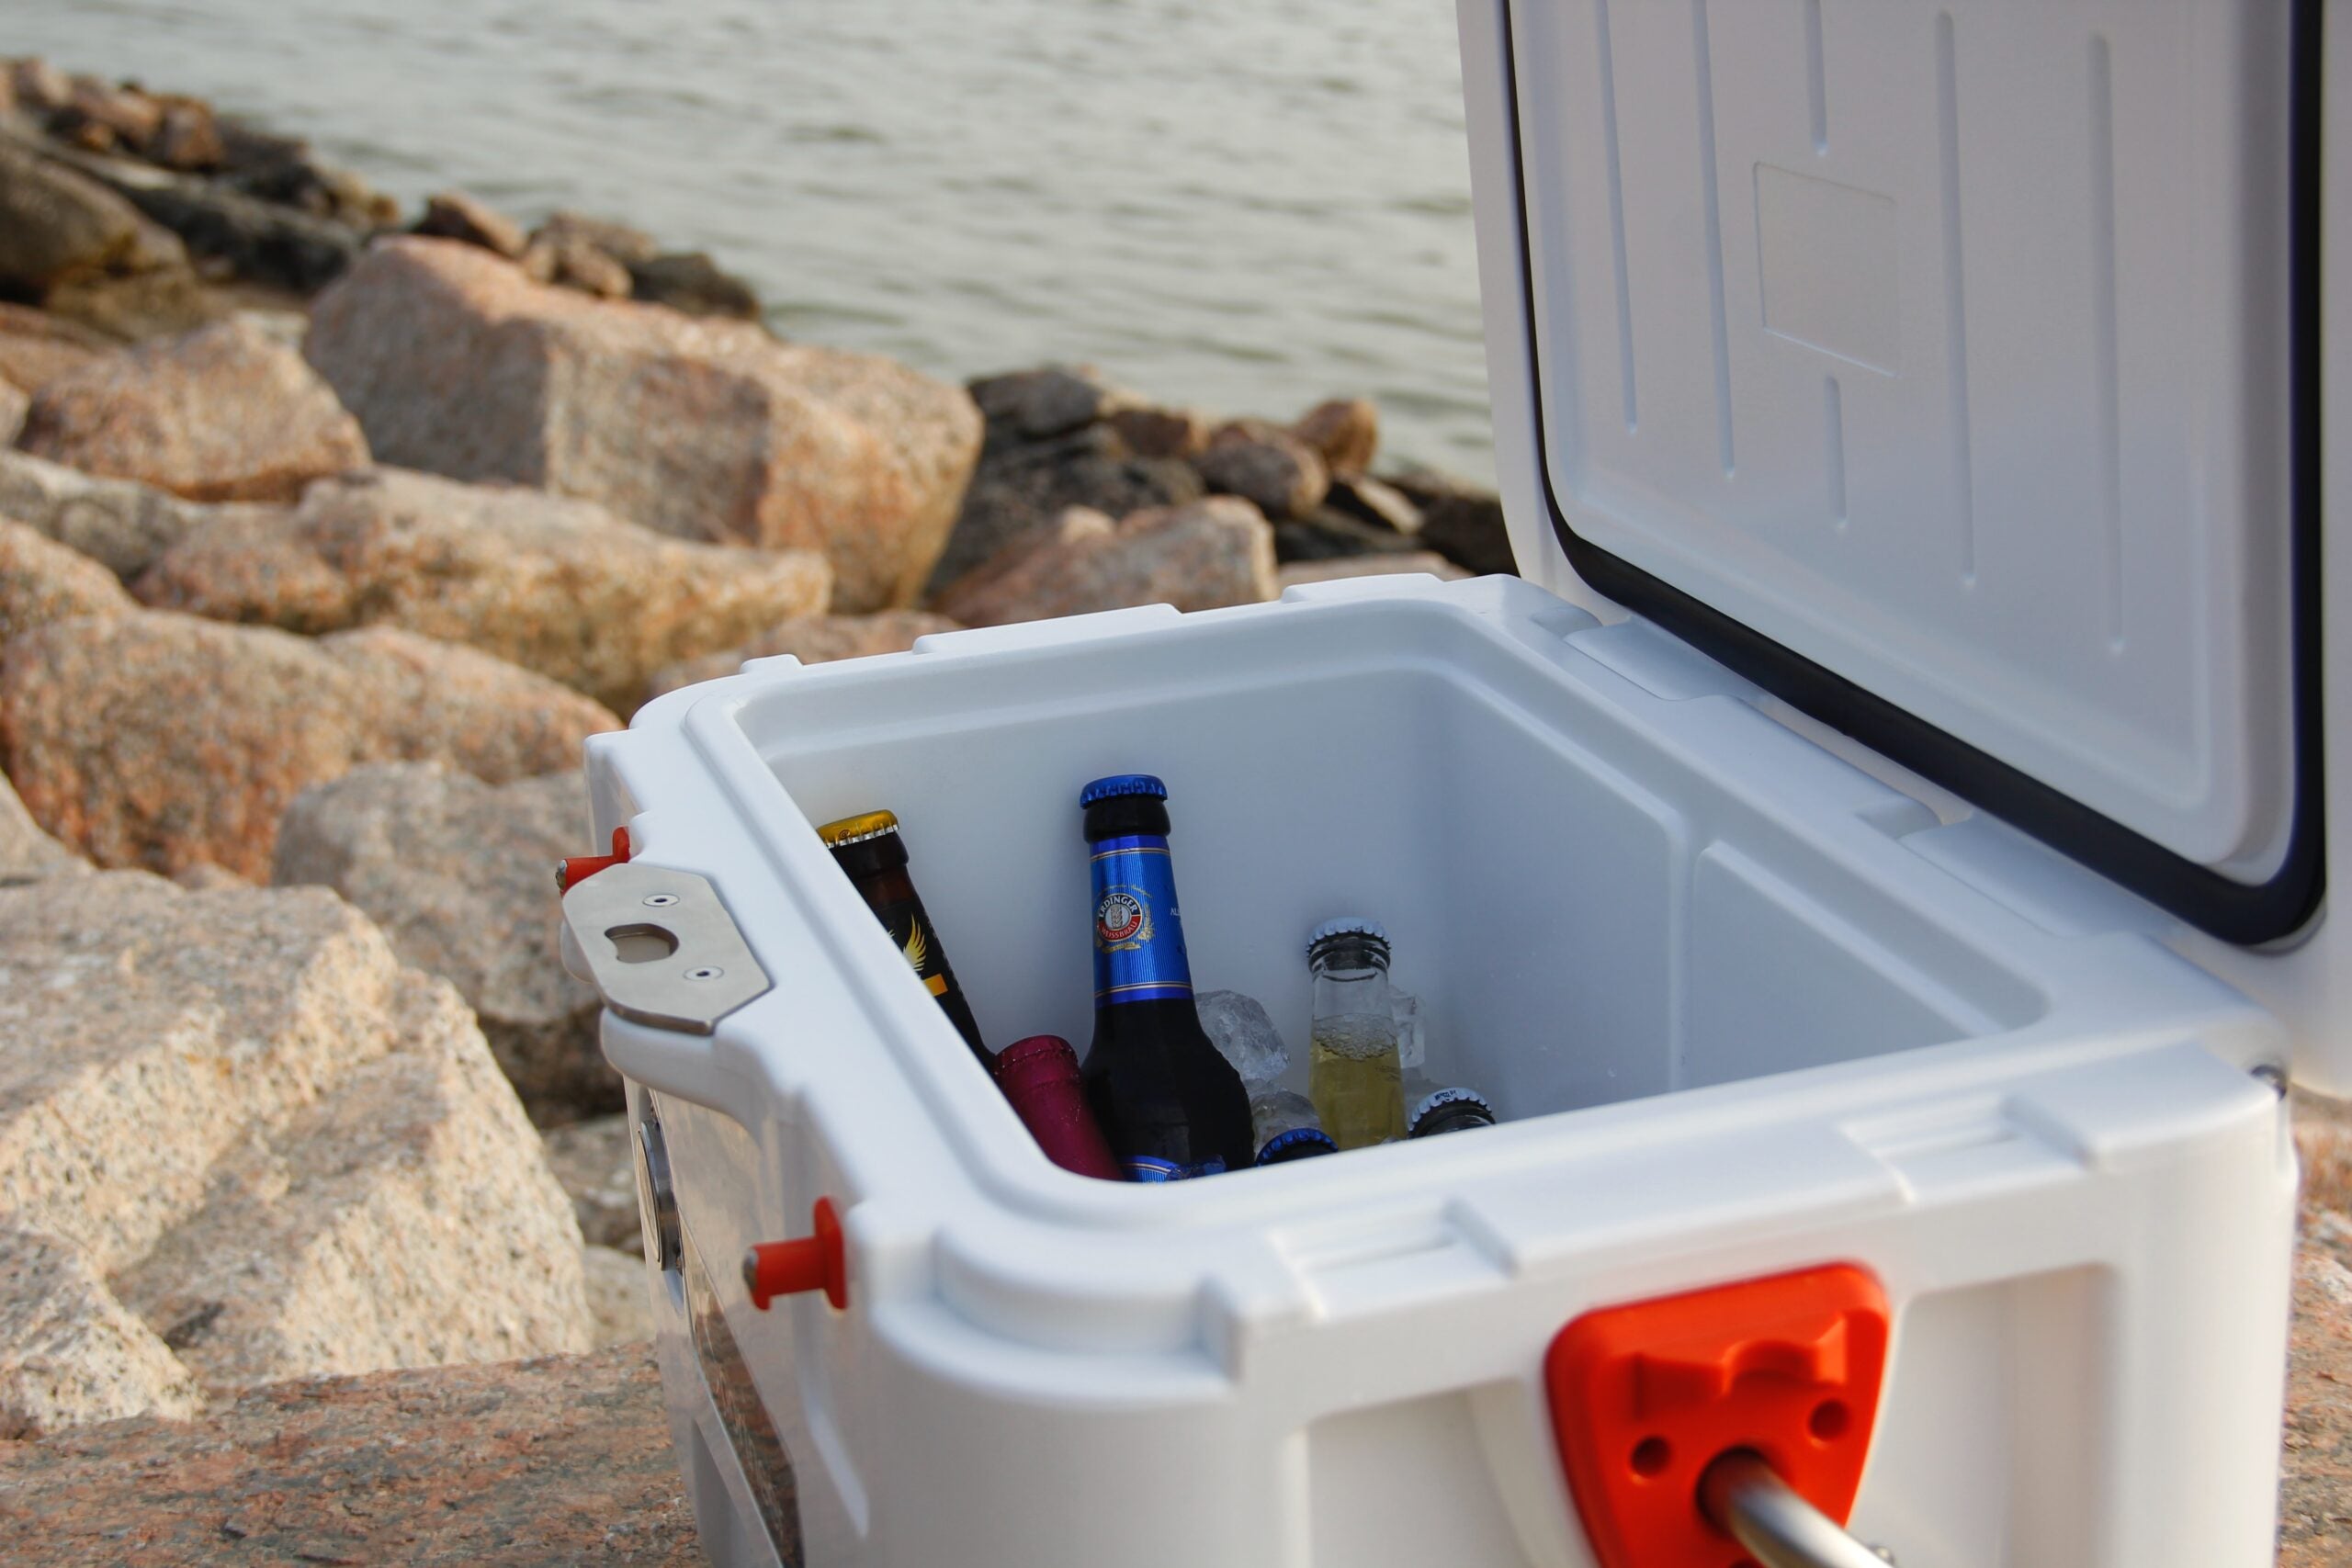 Tips for Repairing and Packing Coolers for Camping